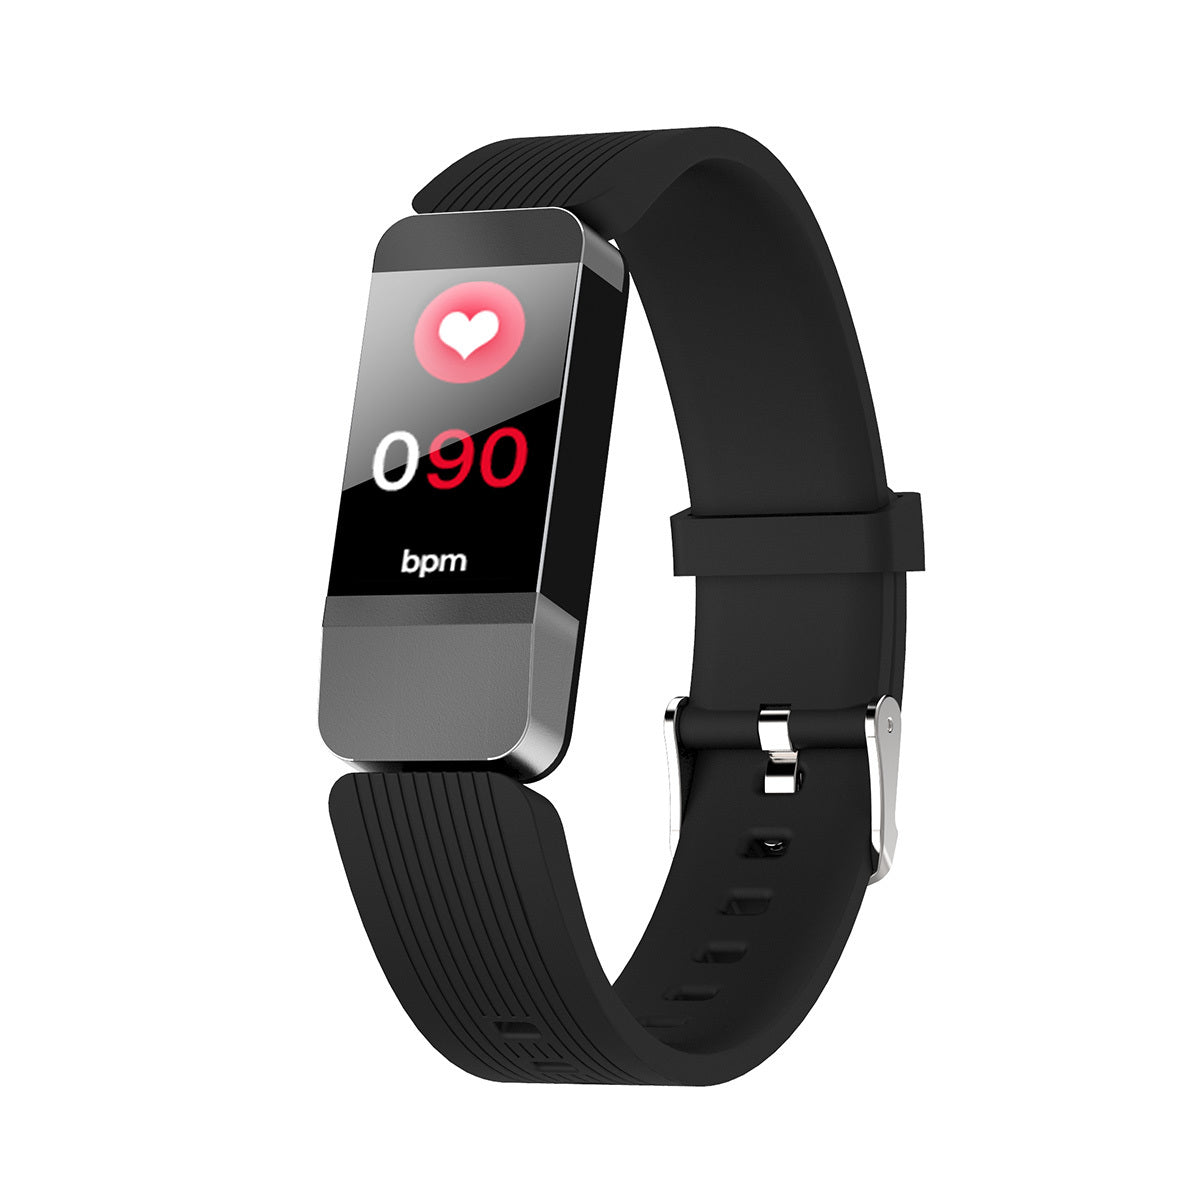 V10 0.96 inch Color Screen bluetooth Heart Rate Sleep Monitor Fitness Track Smart Wristband